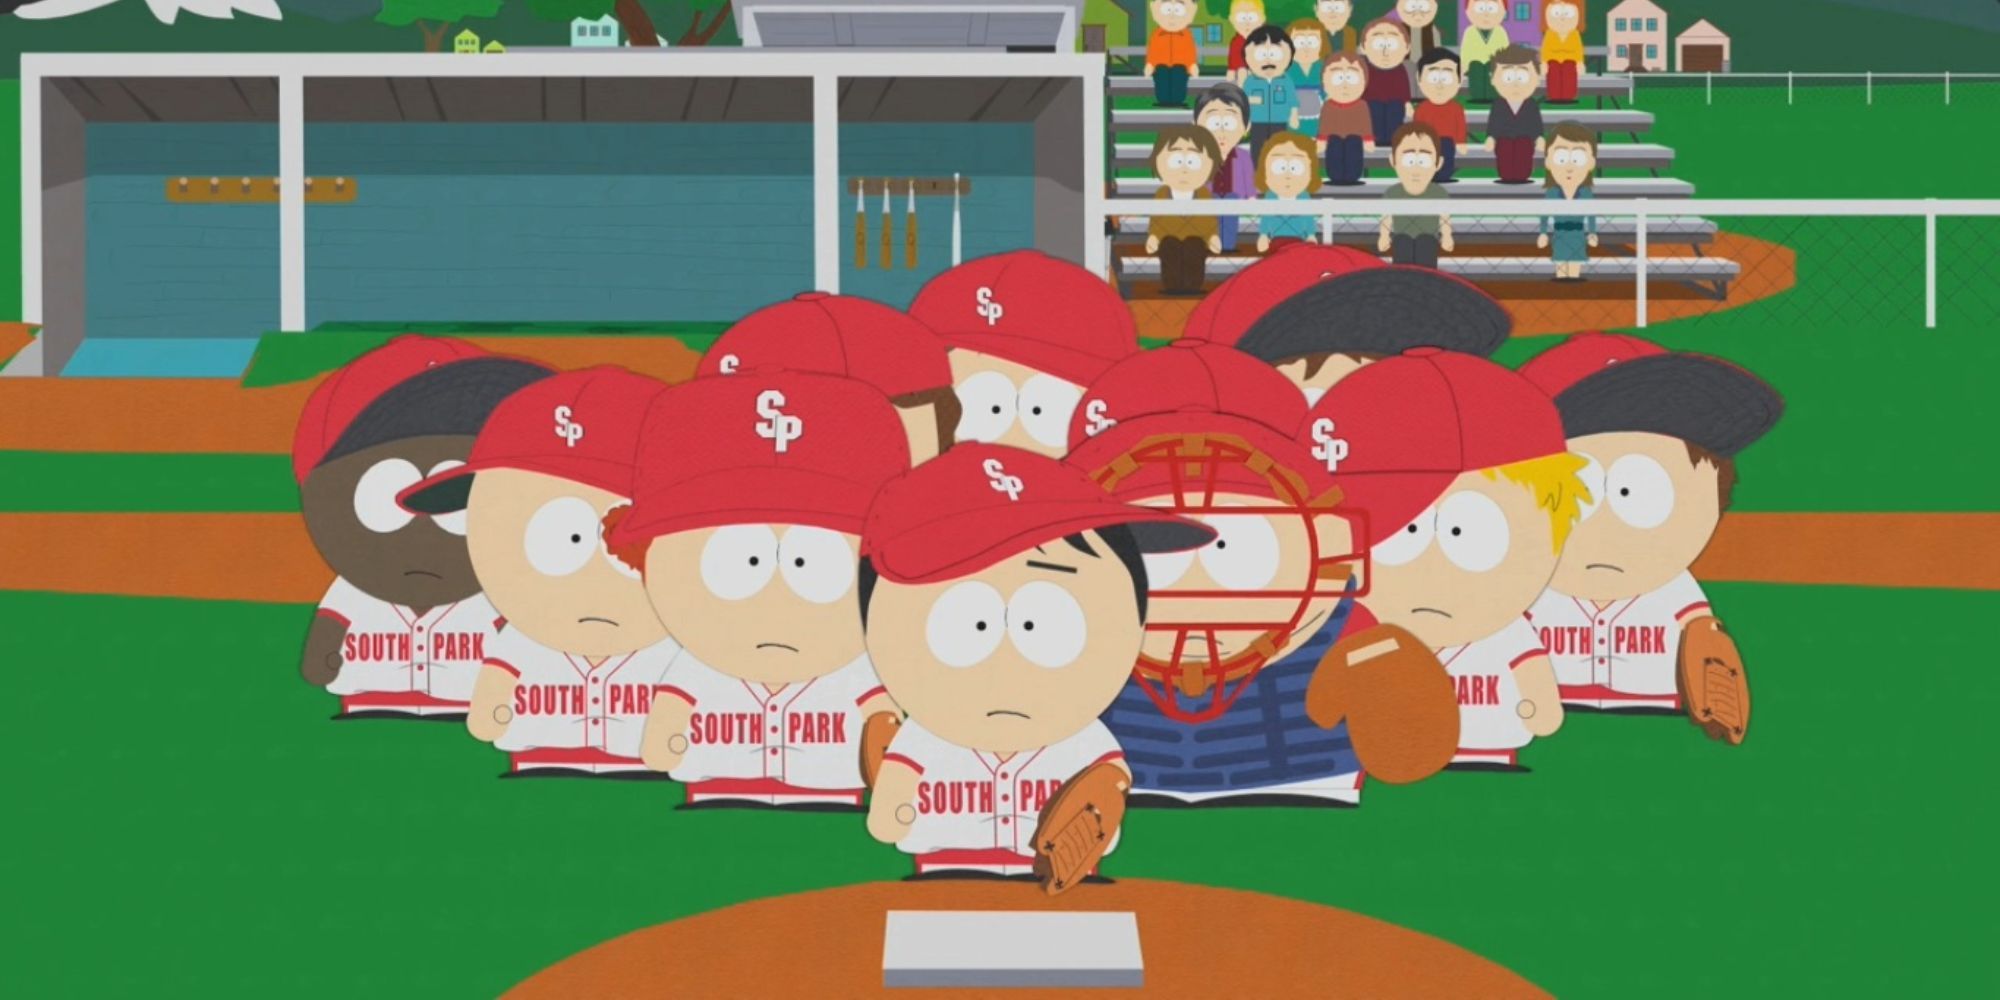 The boys prepare to play baseball in 'The Losing Edge' (South Park)